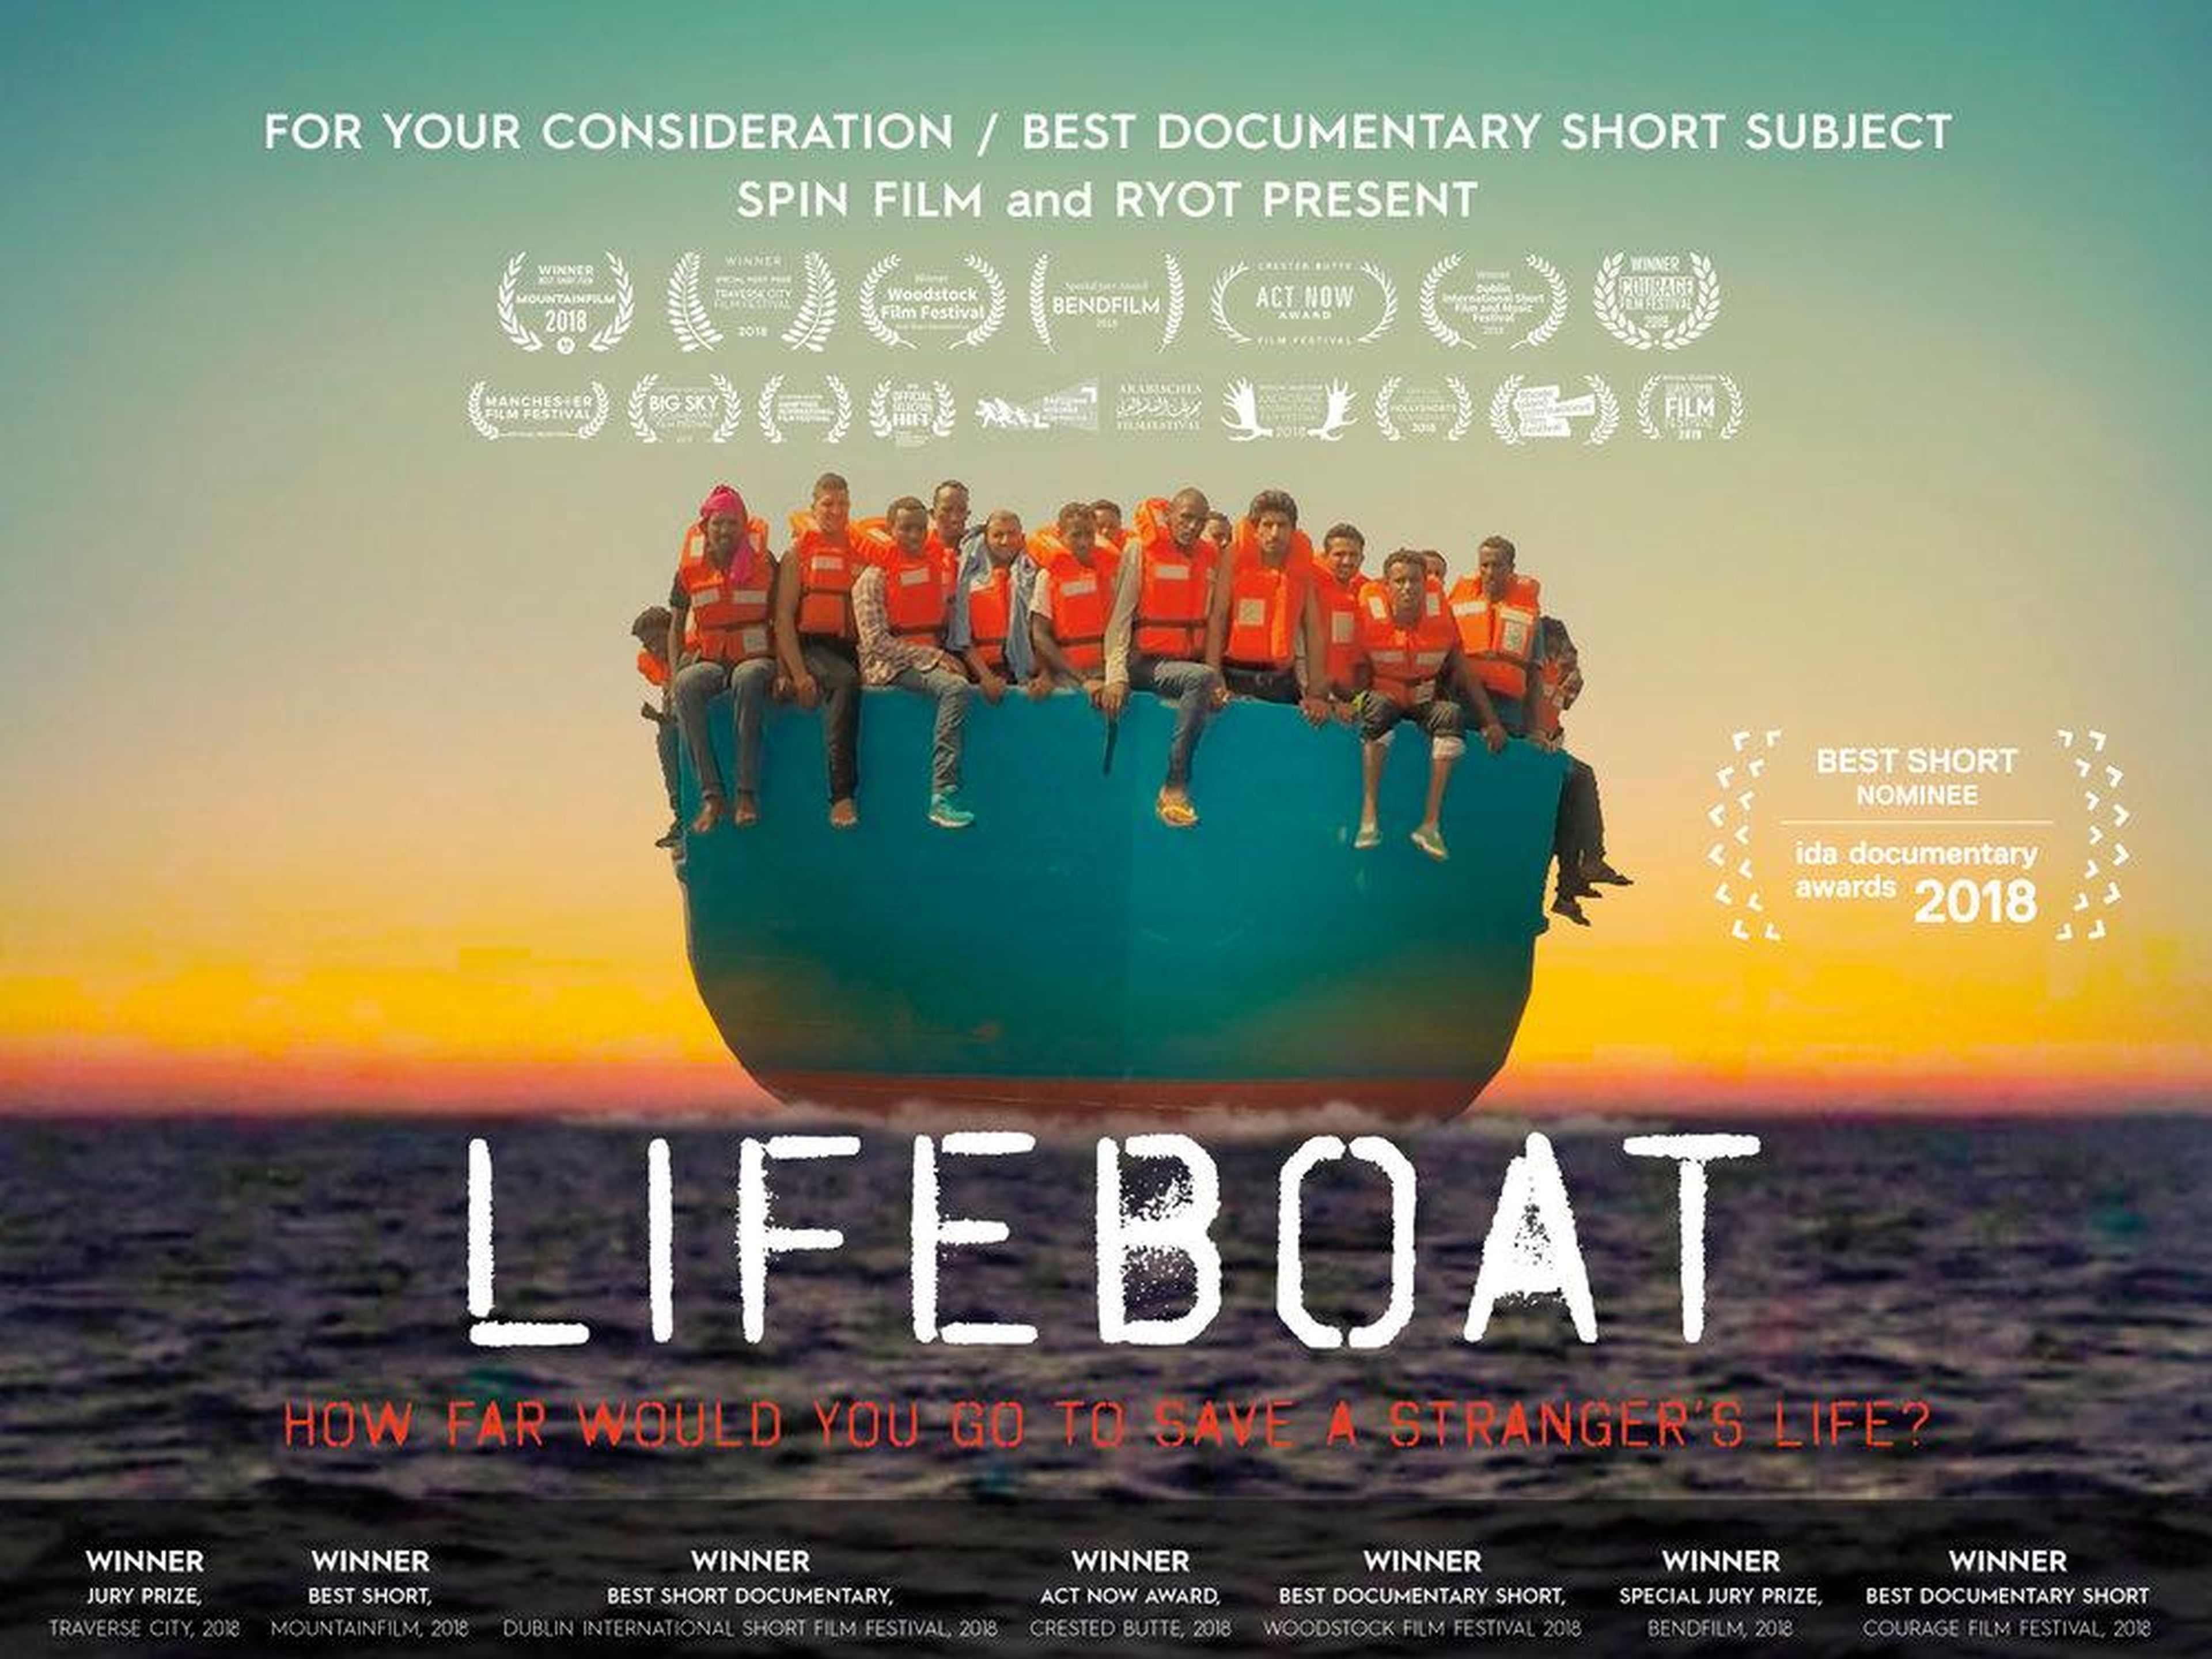 "Lifeboat" was released in late 2018.